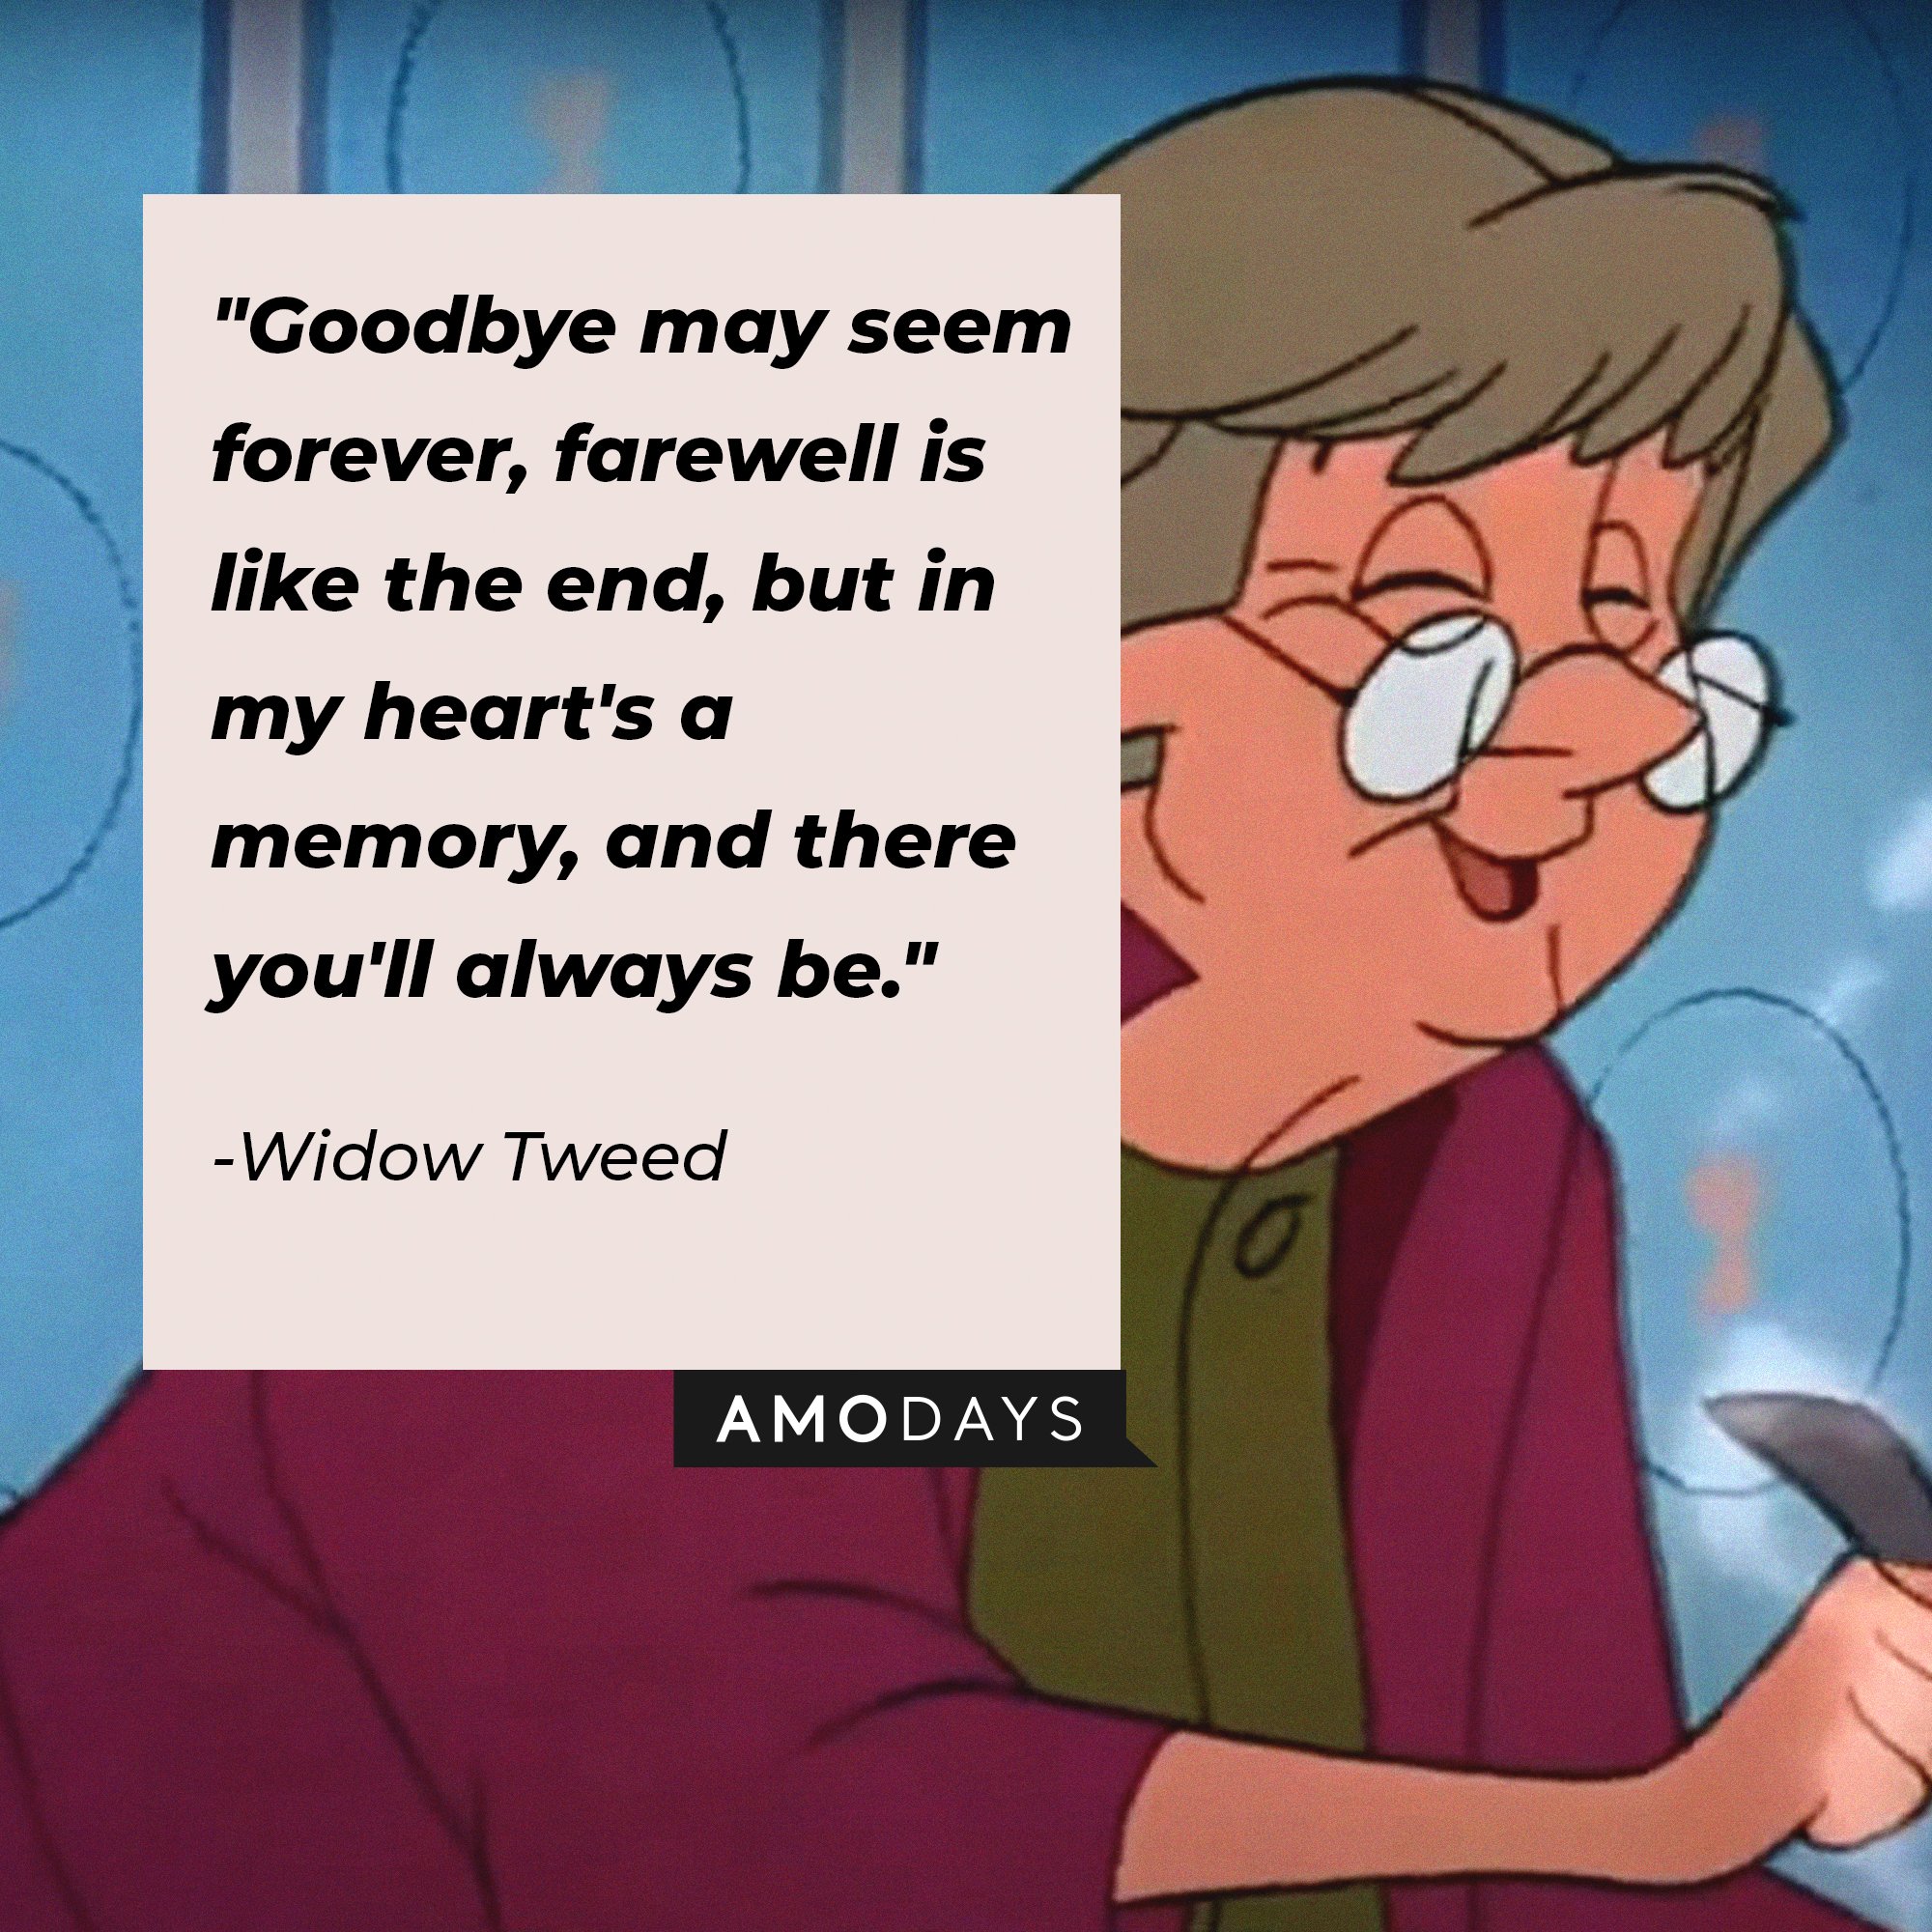 Widow Tweed’s quote: "Goodbye may seem forever, farewell is like the end, but in my heart's a memory, and there you'll always be." | Image: AmoDays